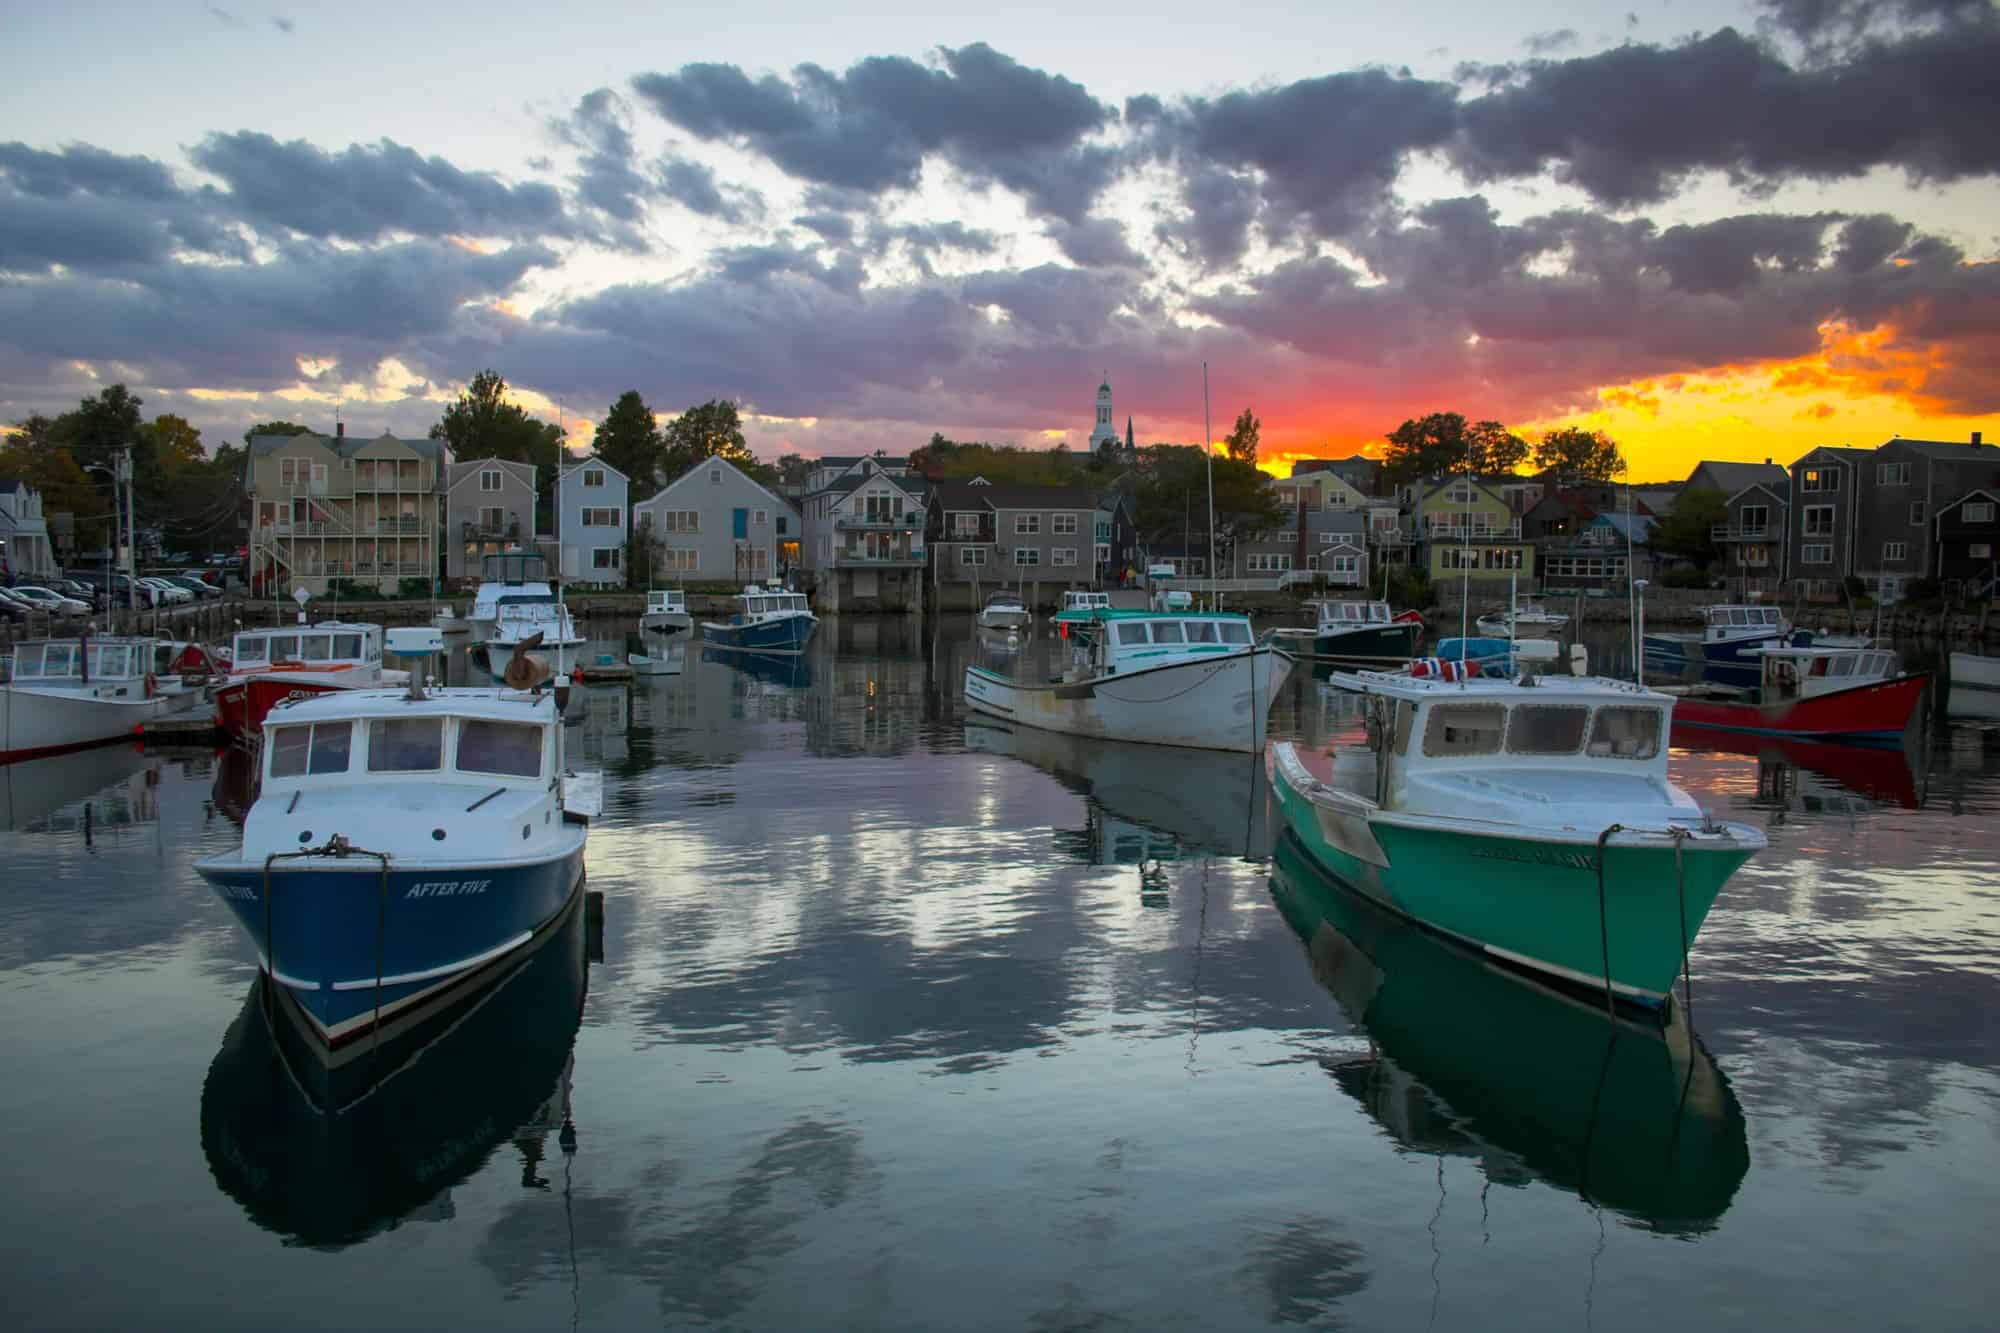 boats sit in the rockport harbor at sunset as orange light spreads along the sky among dark clouds